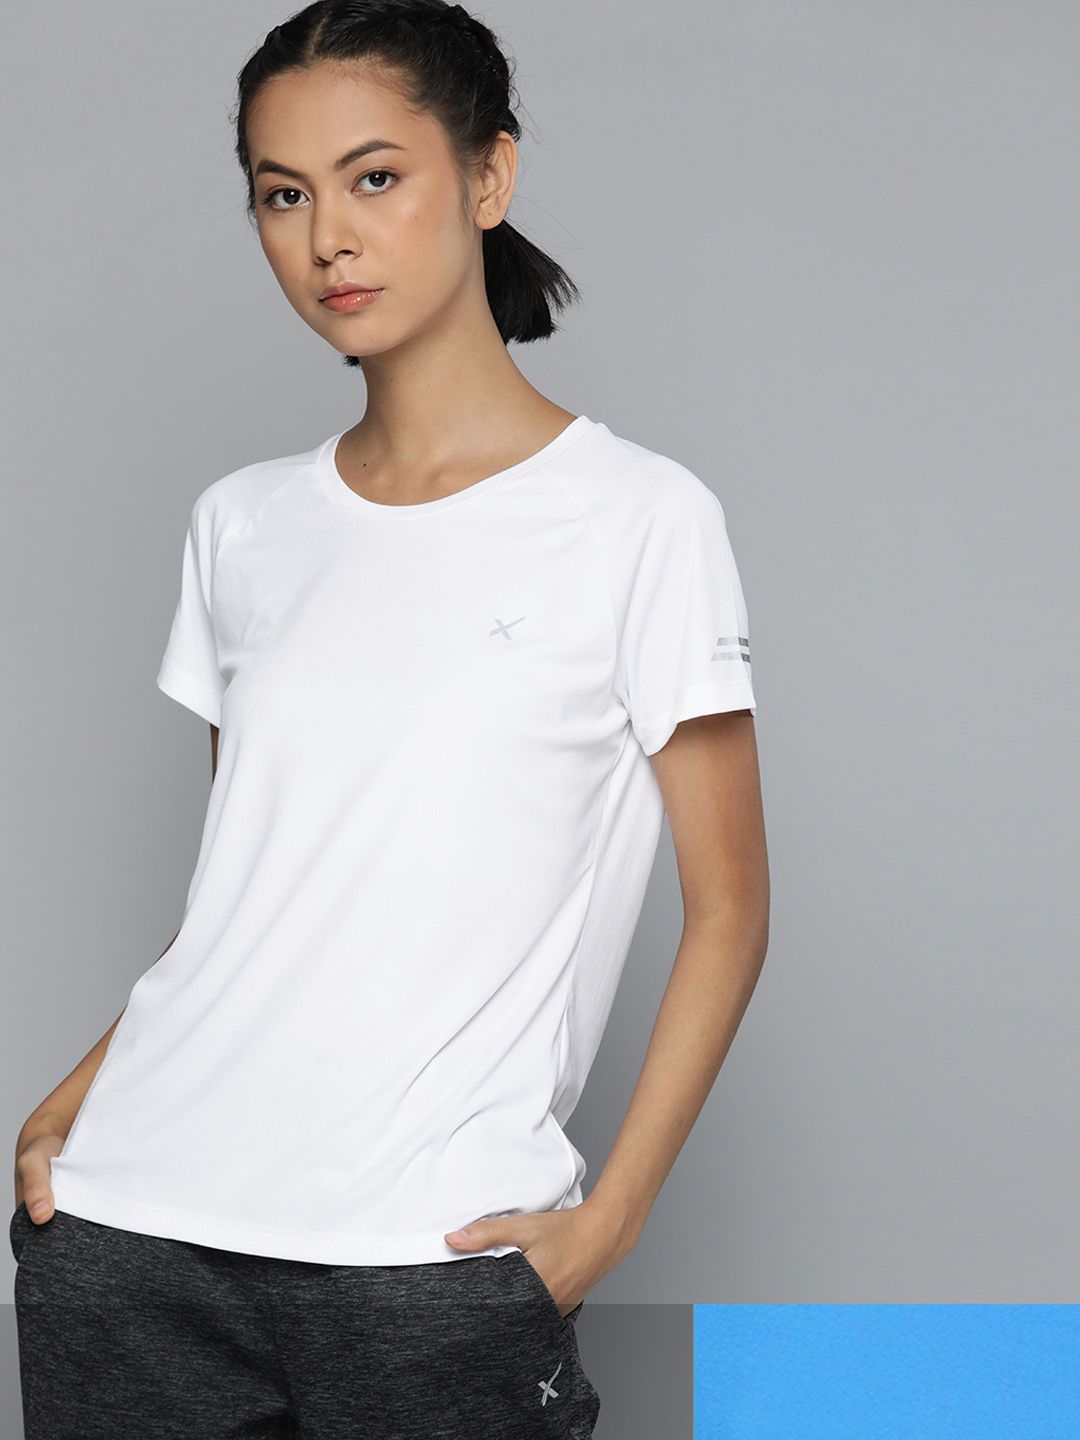 HRX By Hrithik Roshan Running Women Bright White & Neon Blue Rapid-Dry Solid Tshirts Price in India